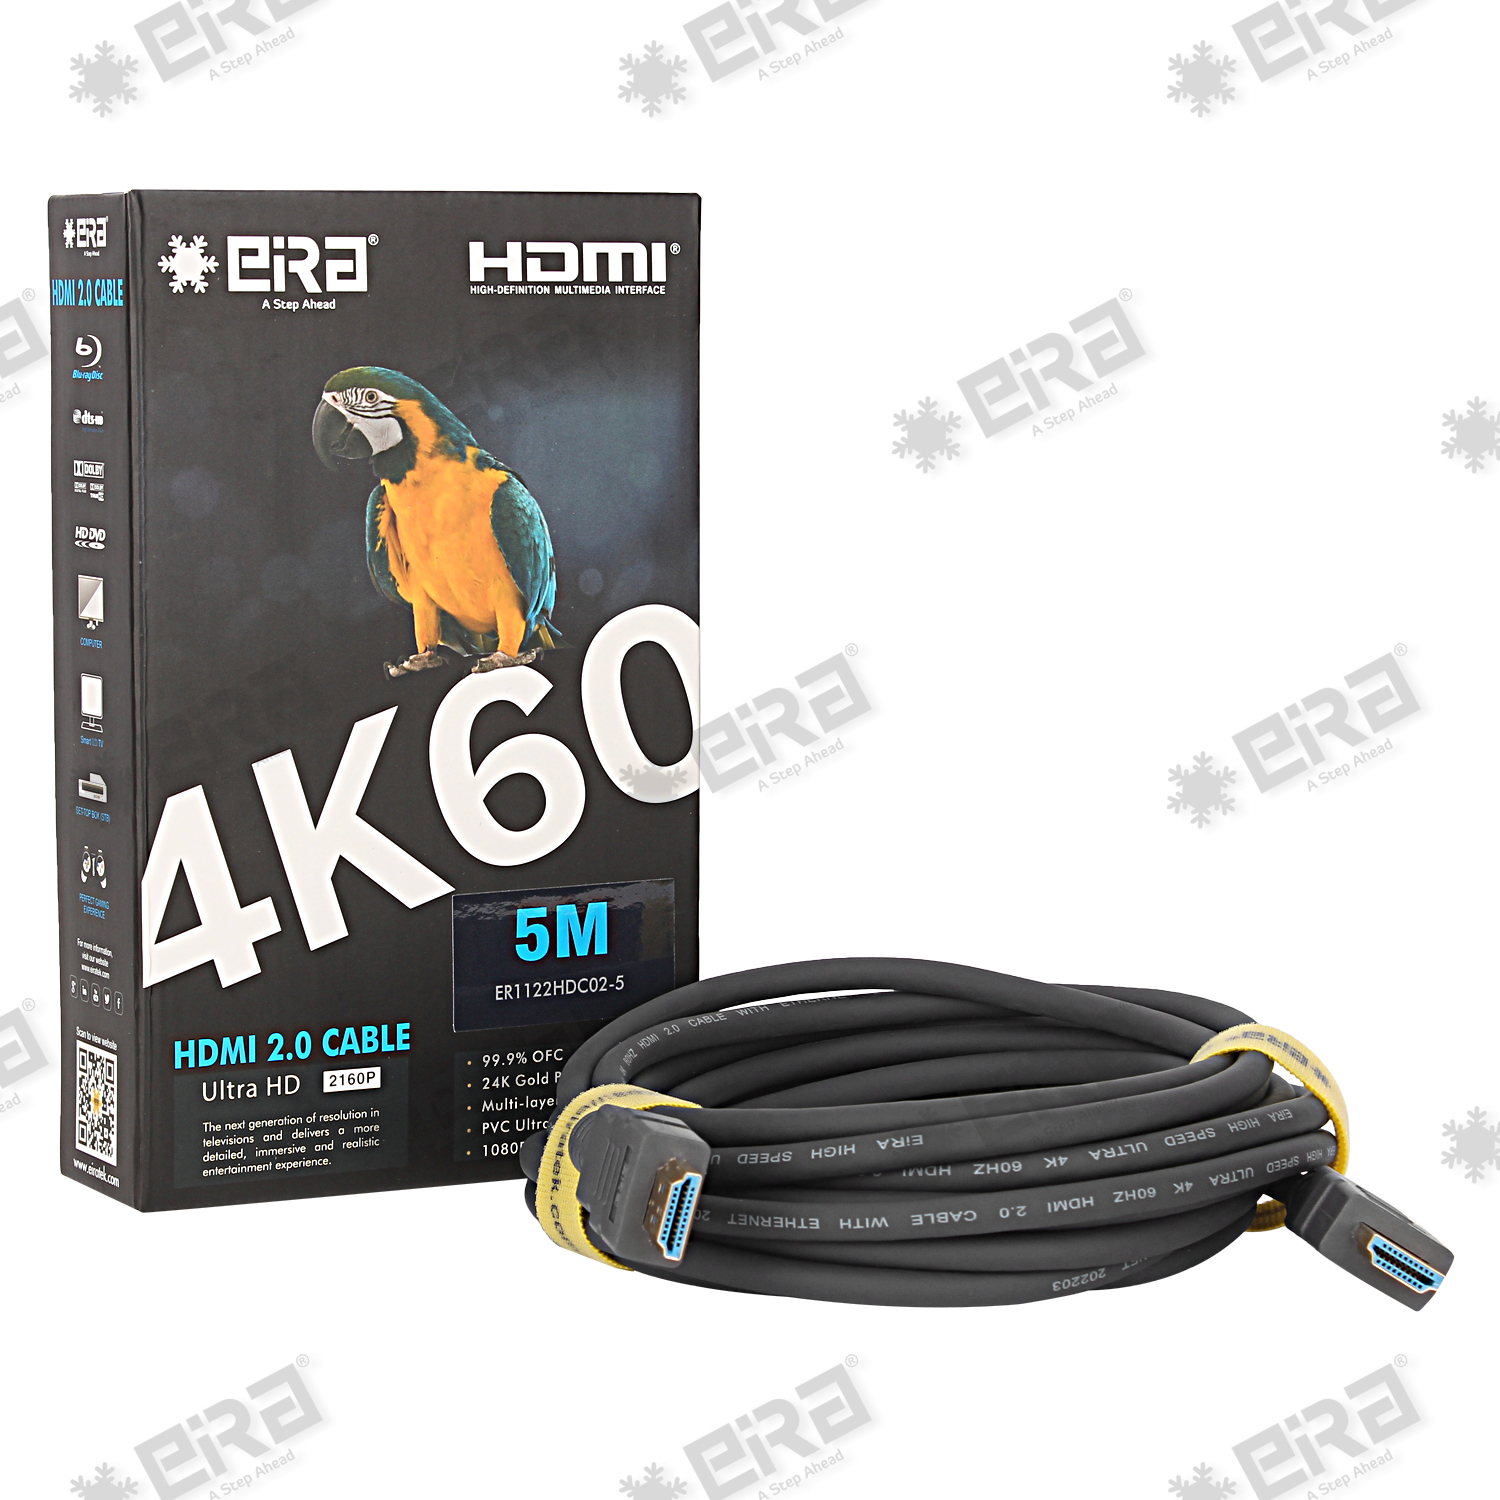 5m HDMI 2.0 High Speed Cable with Ethernet Channel. 4K @60Hz